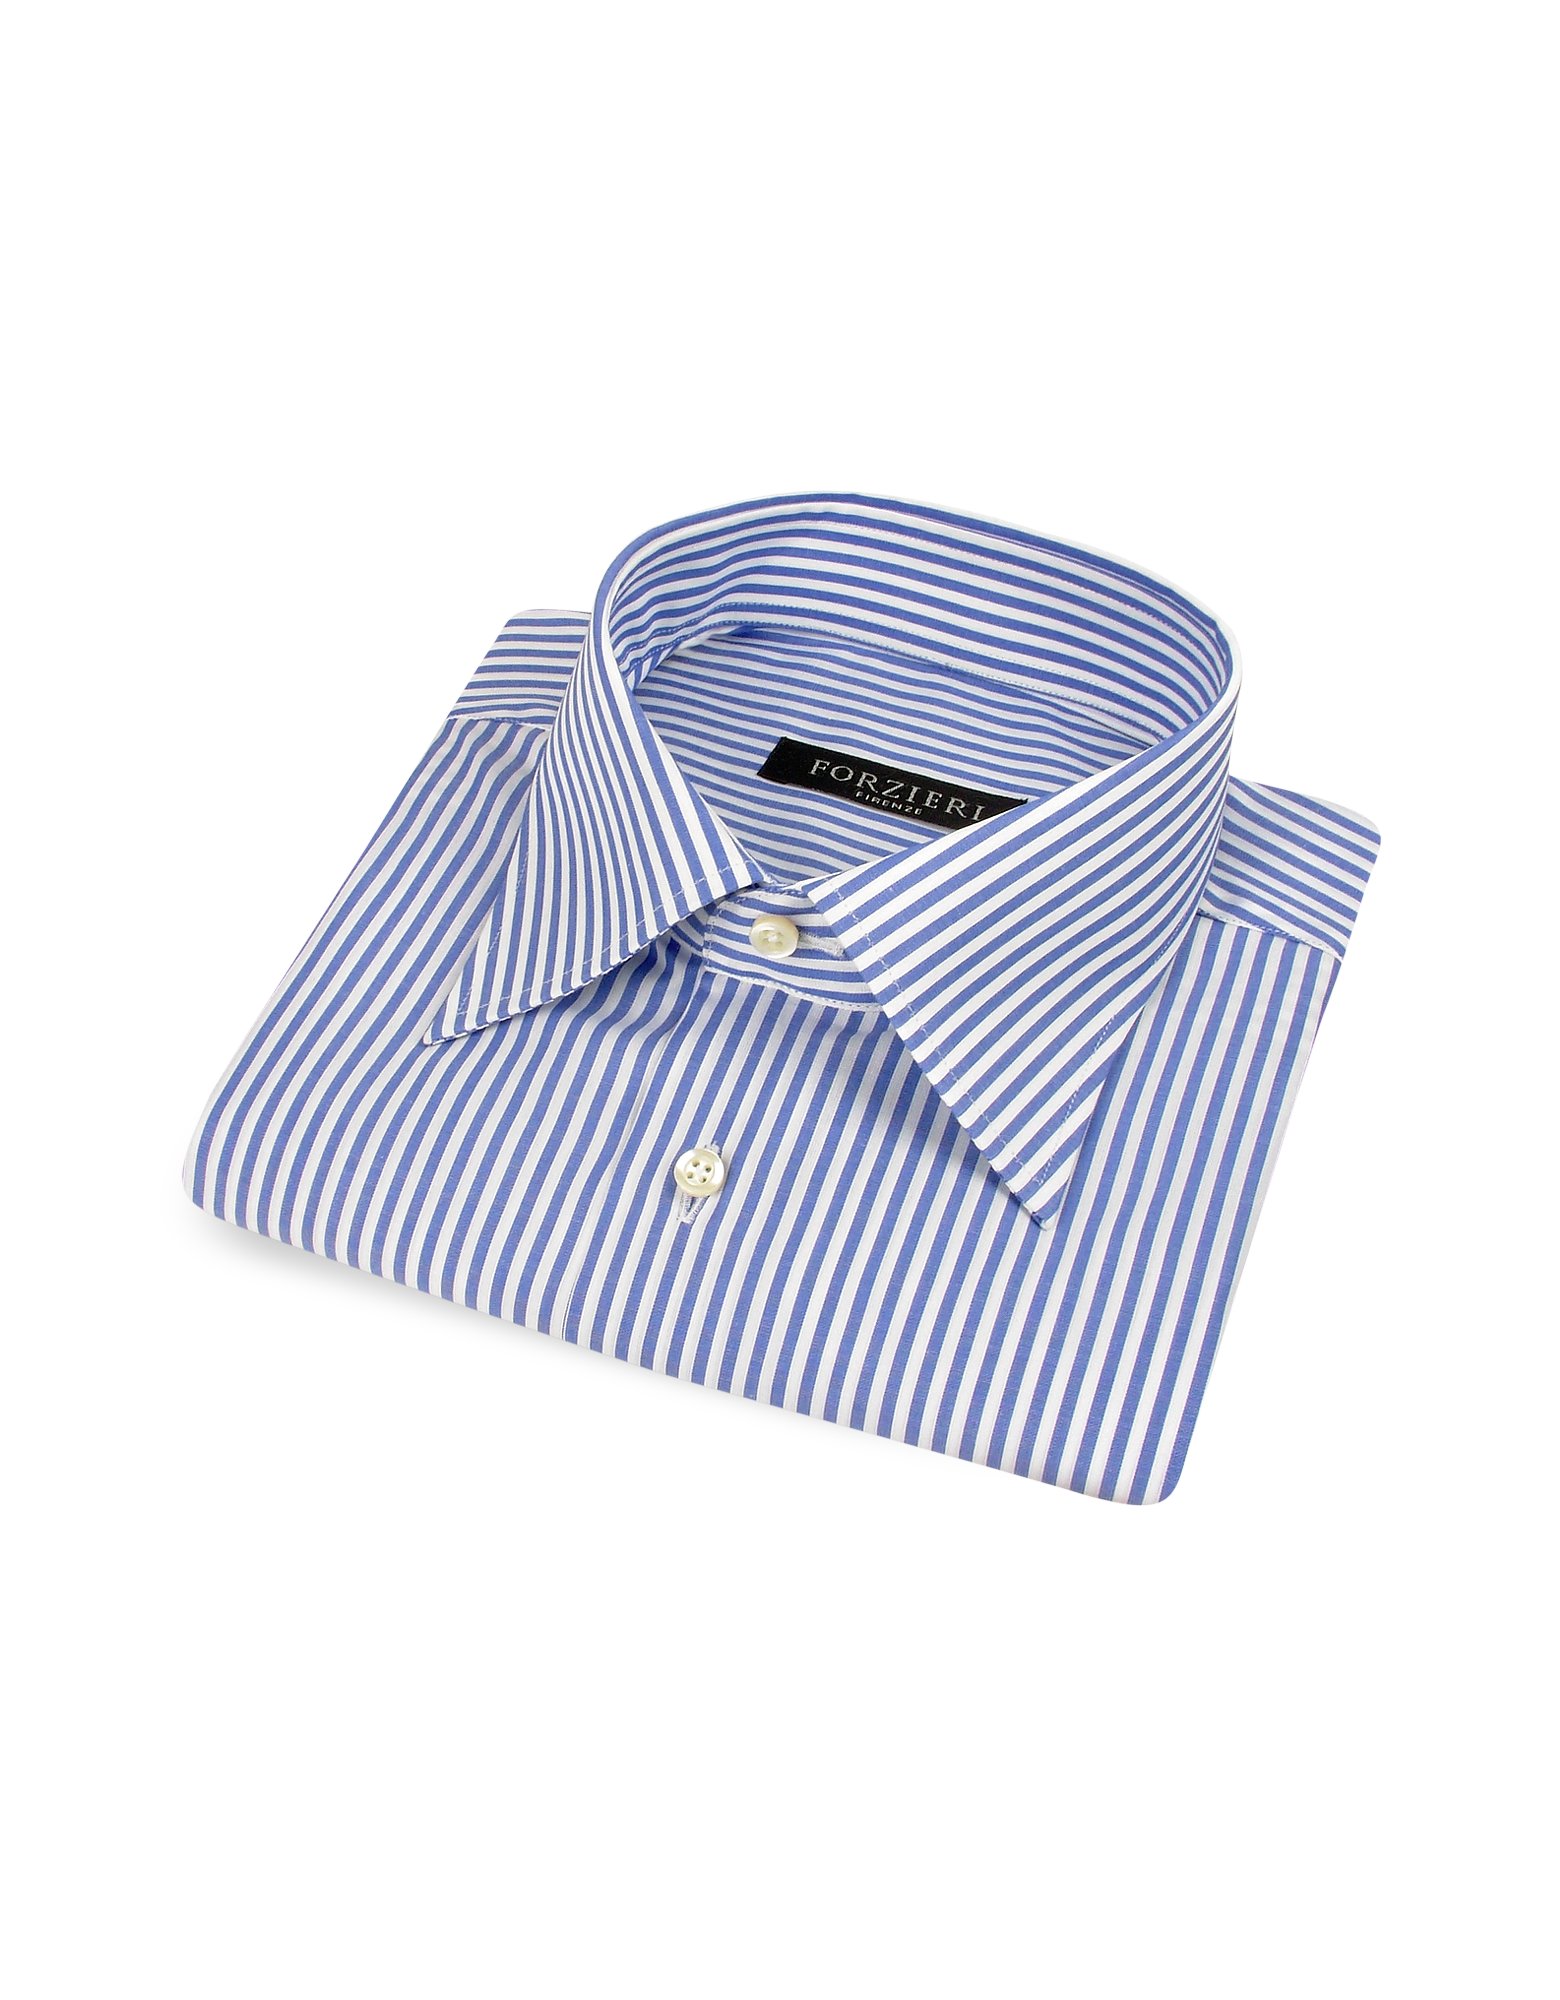 Forzieri Blue and White Stripe French Cuff Cotton Dress Shirt in Blue ...